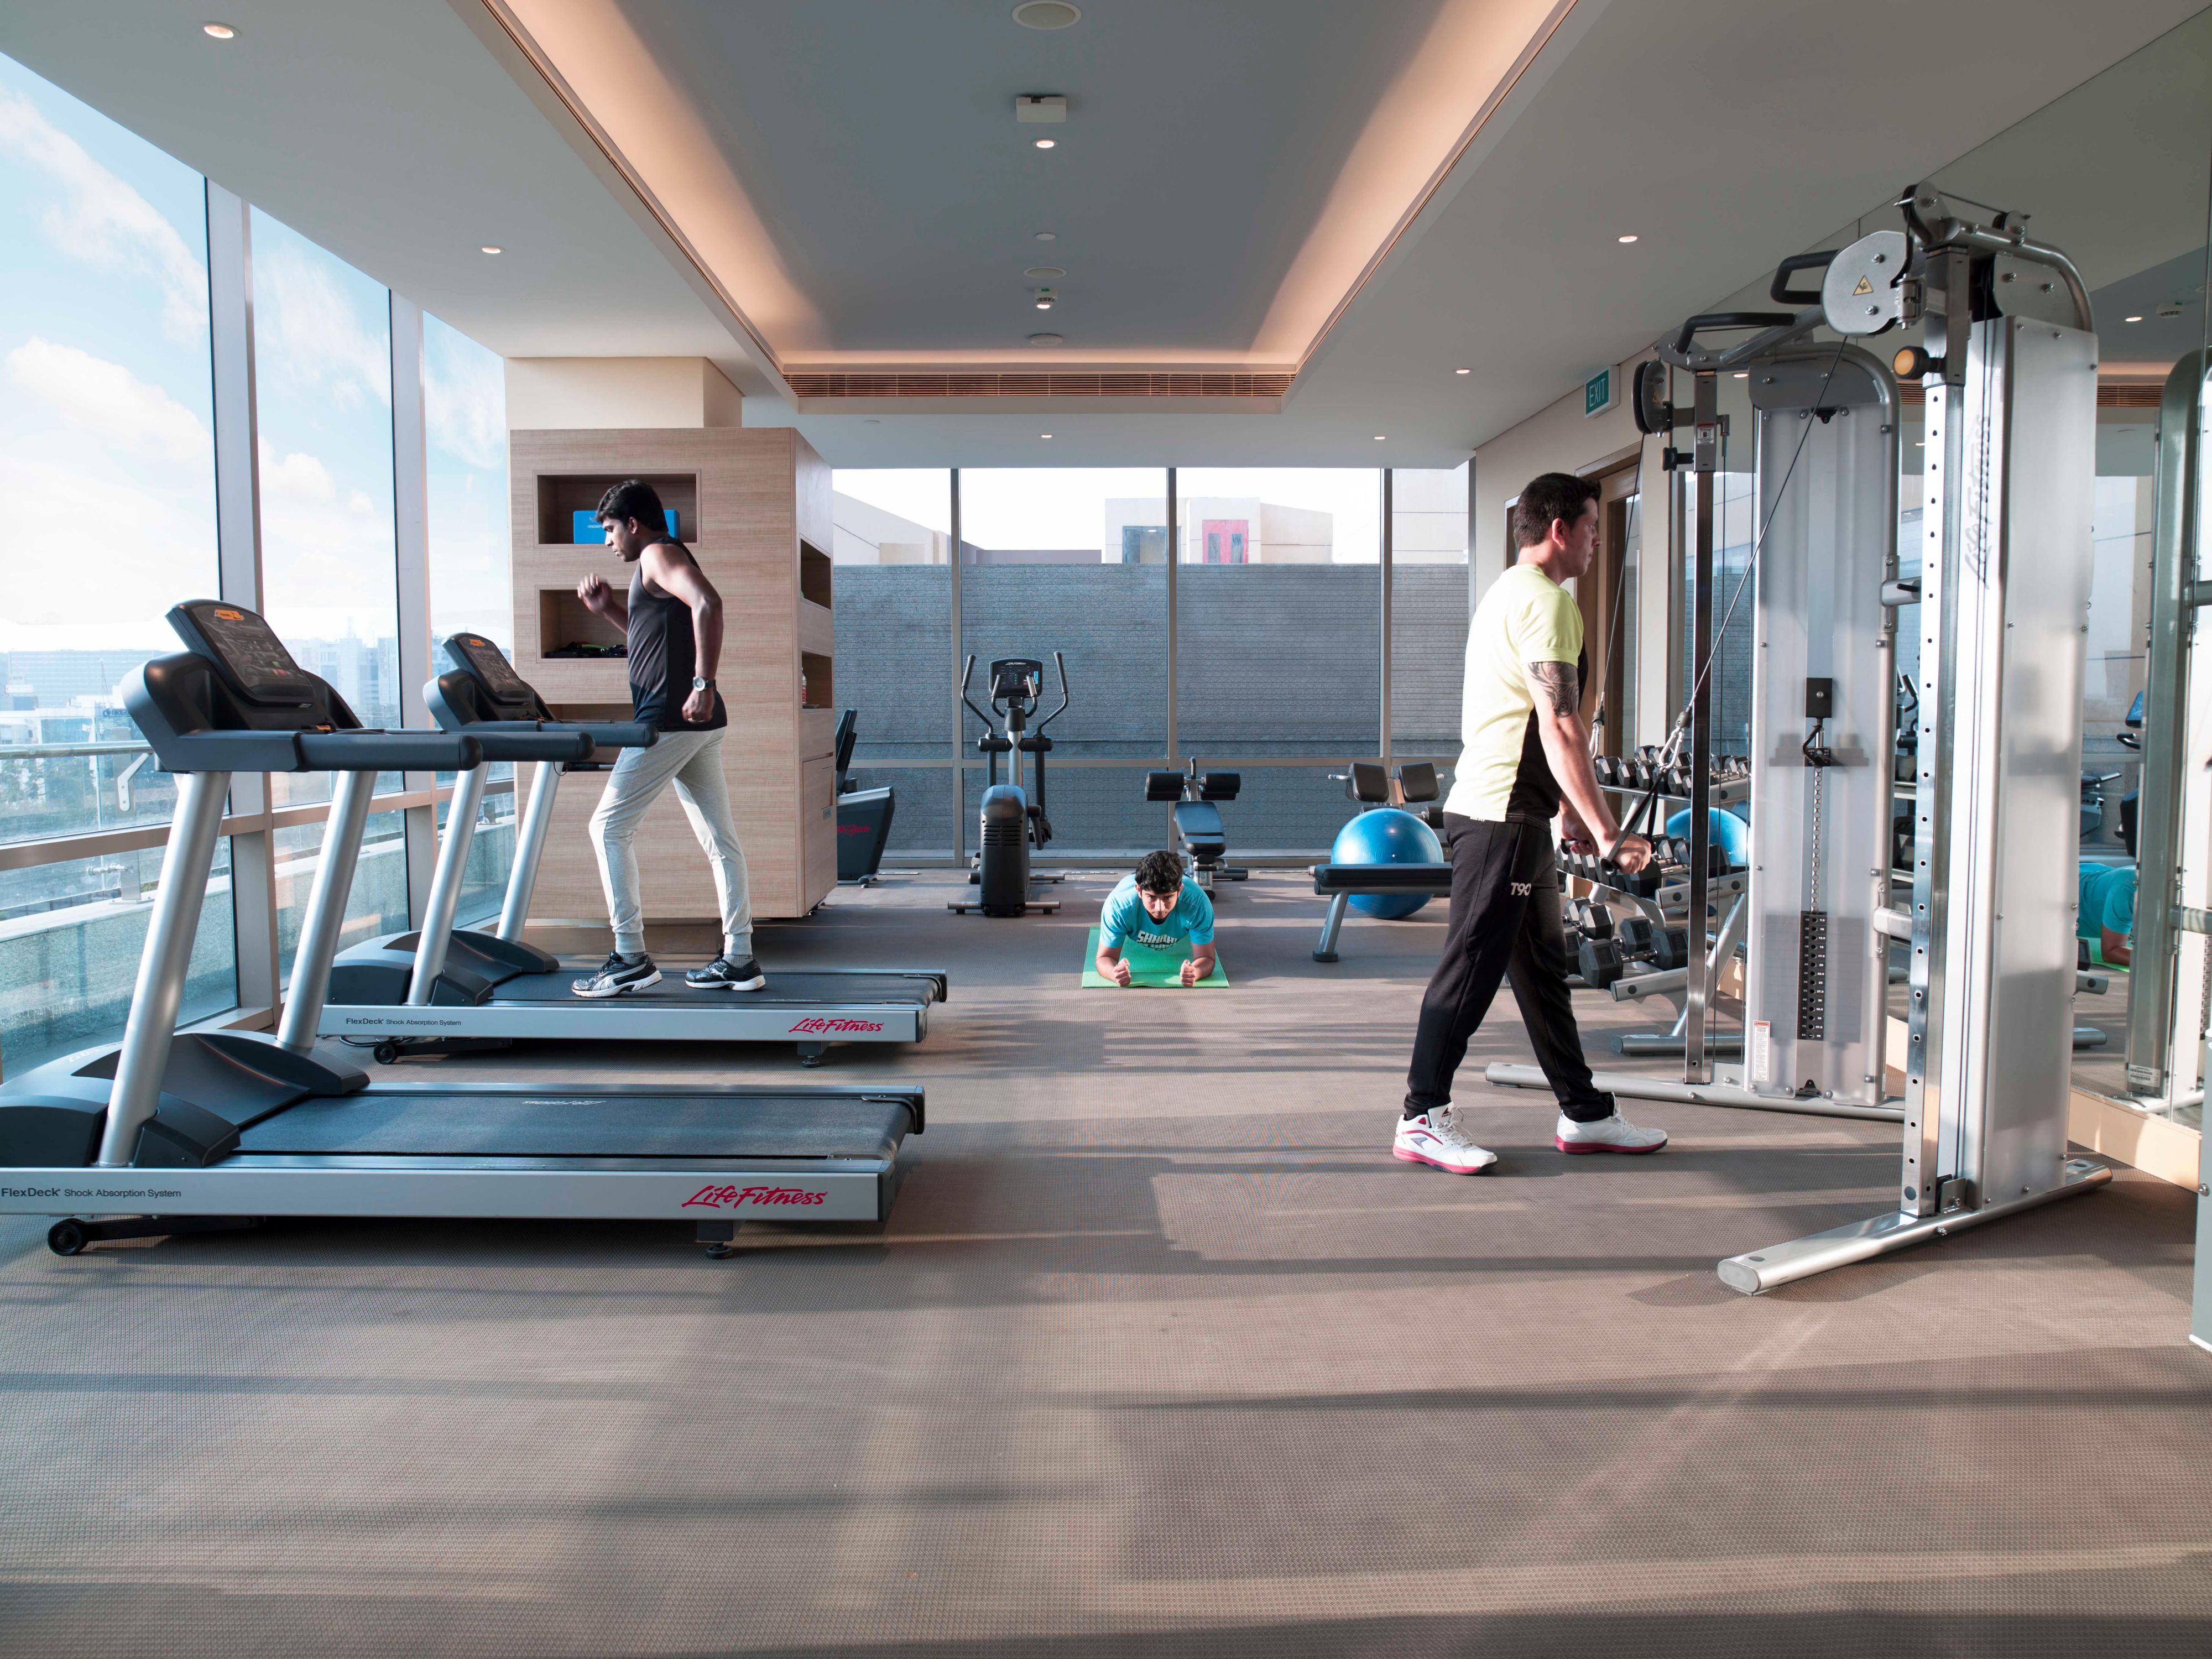 Sign up for our 'Stay Fit Membership' & welcome a fitter & happier you! This fitness package includes rooftop pool access & state-of-the-art gym facilities with the fitness trainer* at the hotel. Enjoy additional benefits of exclusive discounts on Food & Beverage, laundry services, & room packages throughout the membership period.  